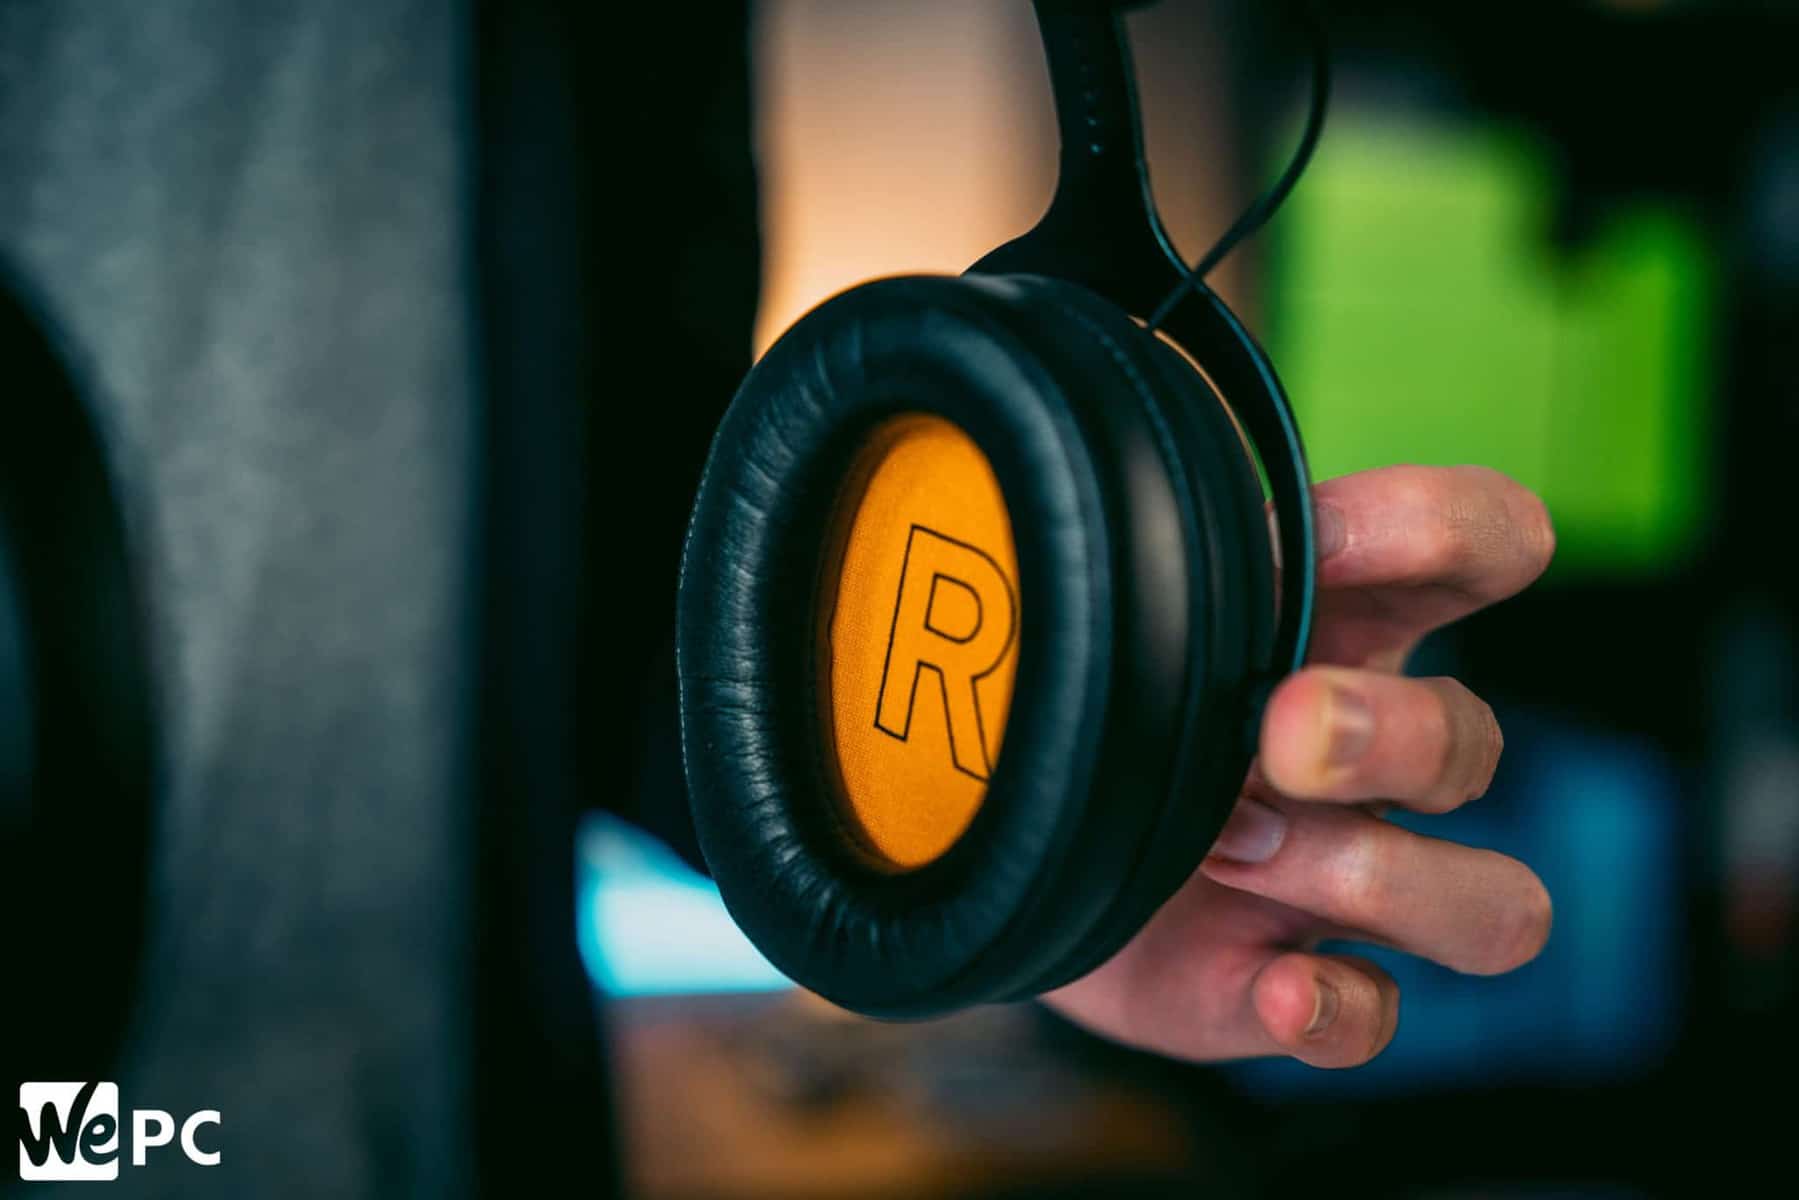 Logitech G Pro X vs Fnatic React - The Best Budget Gaming Headsets? 